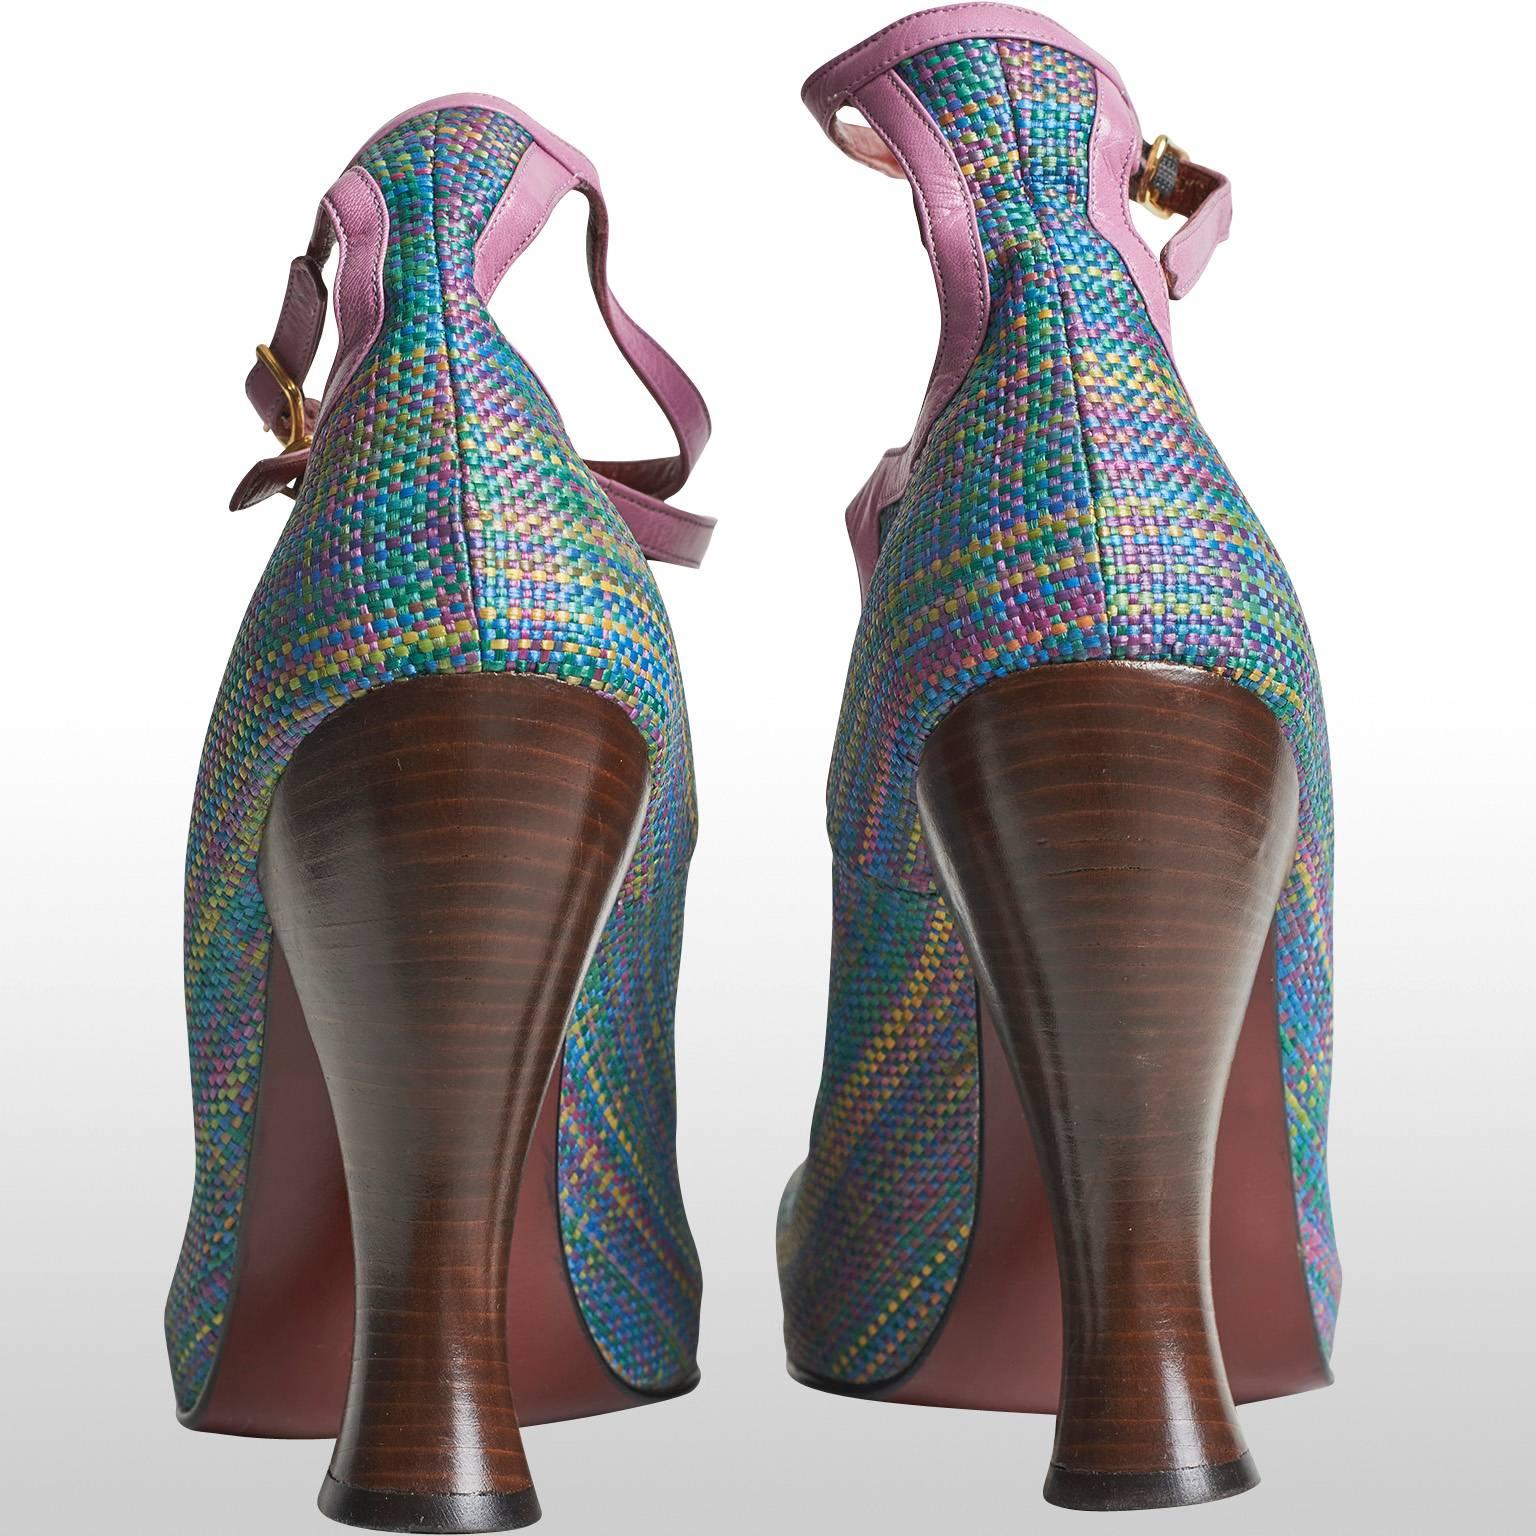 Vivienne Westwood Gold Label Blue Pink Plaid Mary Jane Round Toe Heel Shoes In Excellent Condition For Sale In London, GB